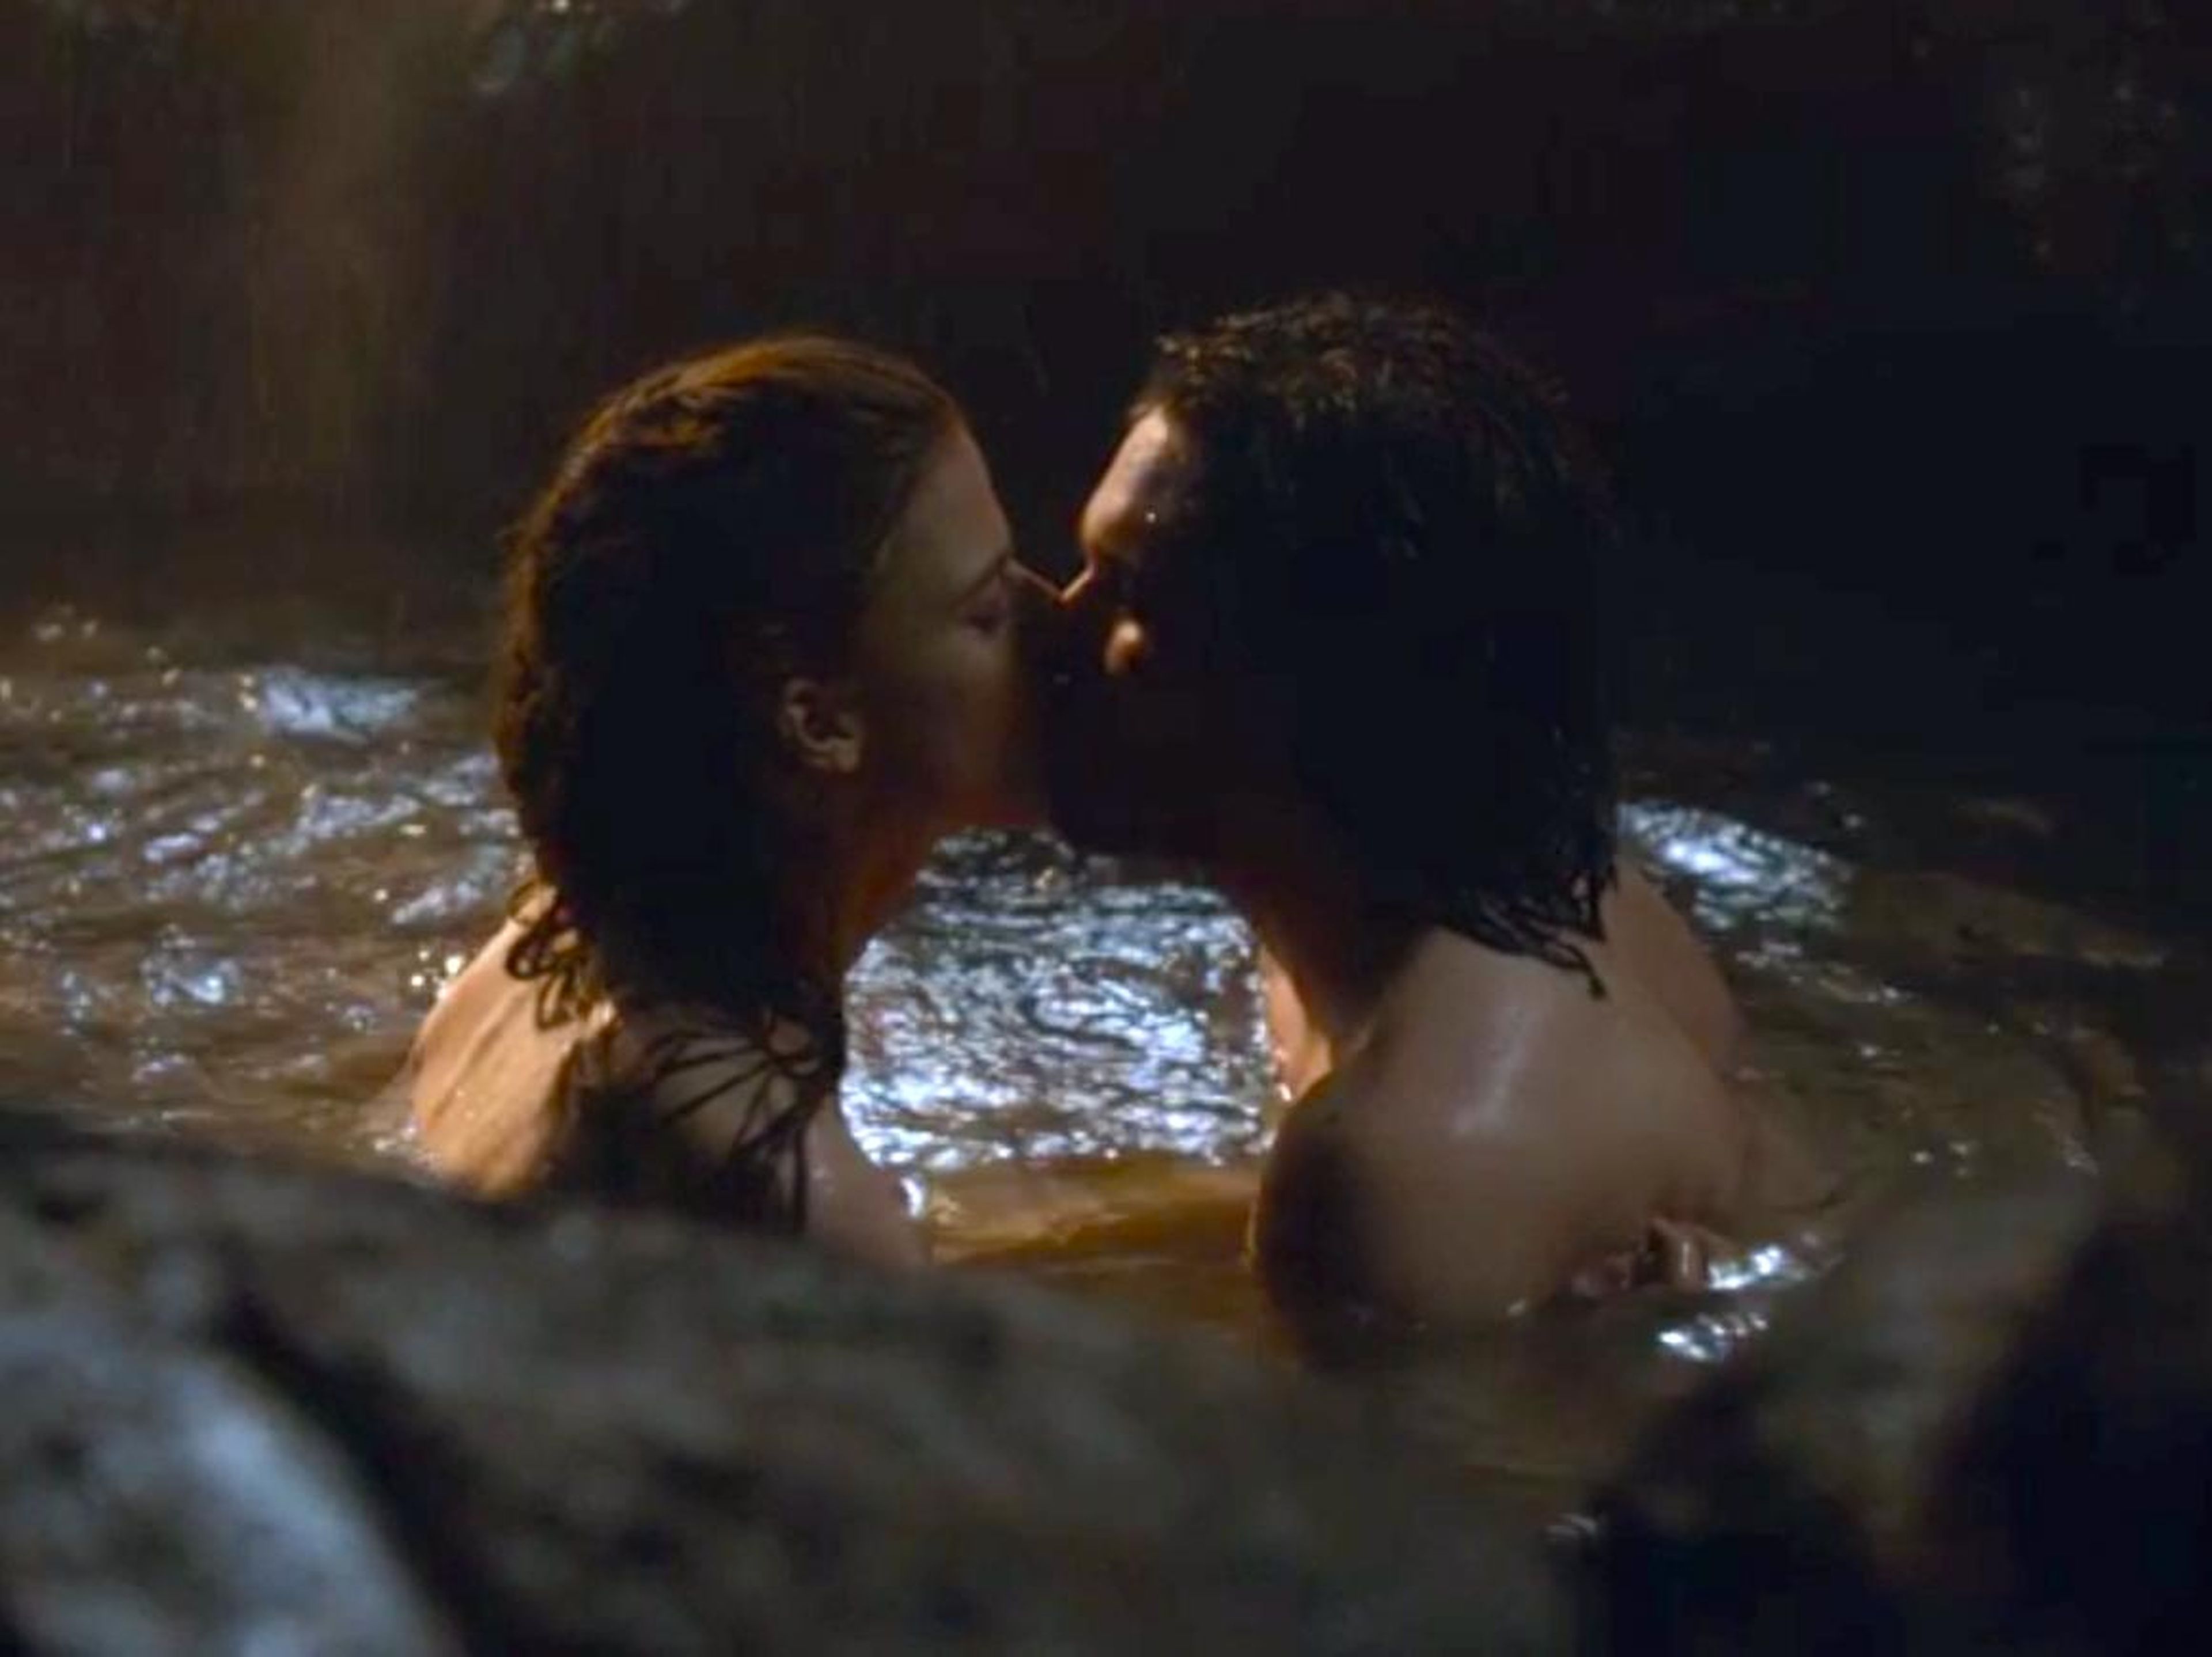 Back on the third season, Jon Snow lost his virginity to Ygritte in a cave with a waterfall and hot spring pool.